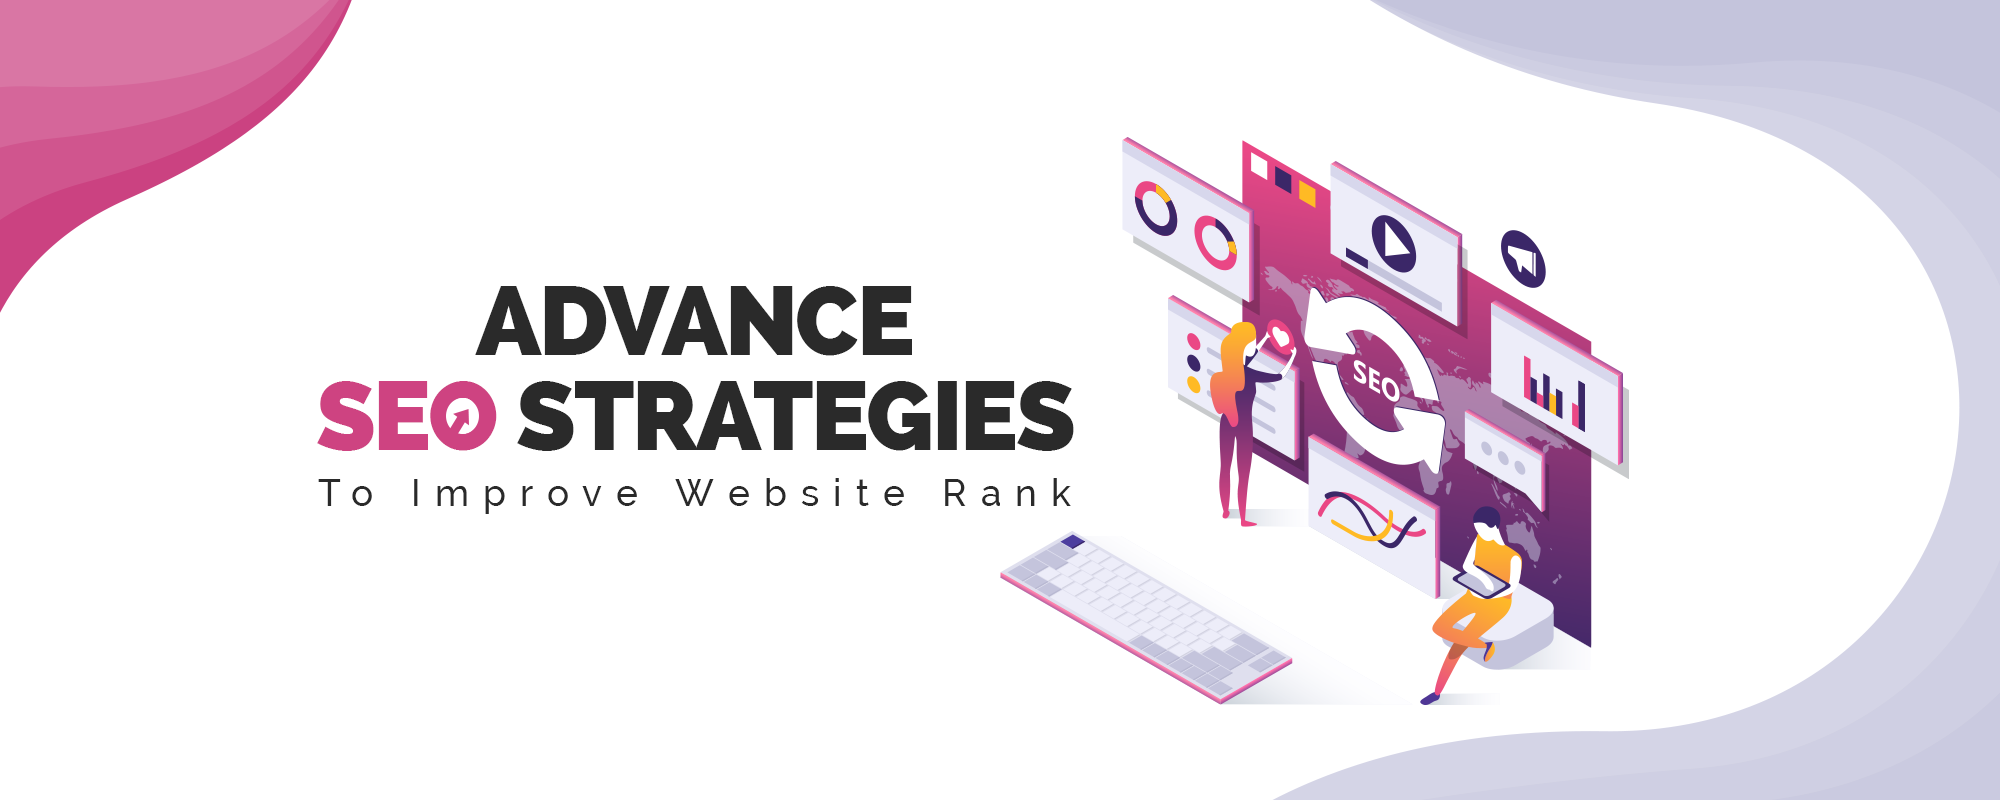 Advanced SEO: 8 Proven Techniques for Higher Rankings